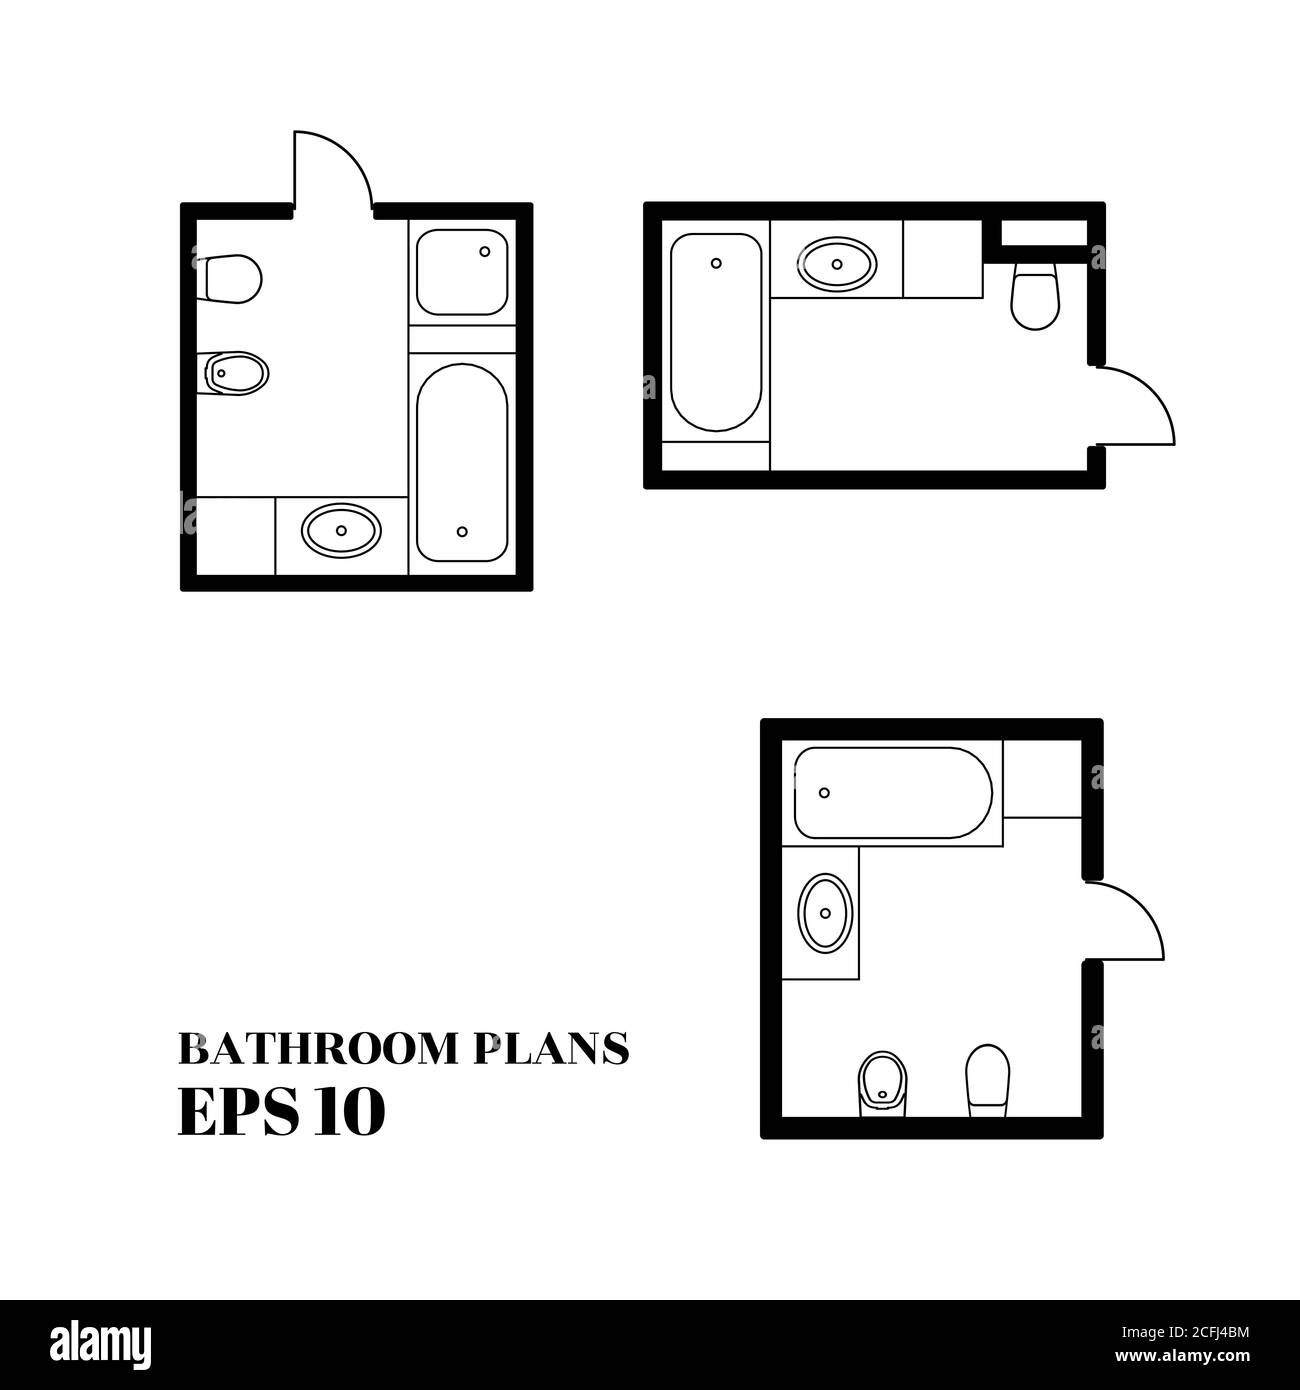 Architectural plans for bathrooms. Set of architectural drawings. Black and white vector illustration EPS10. Stock Vector